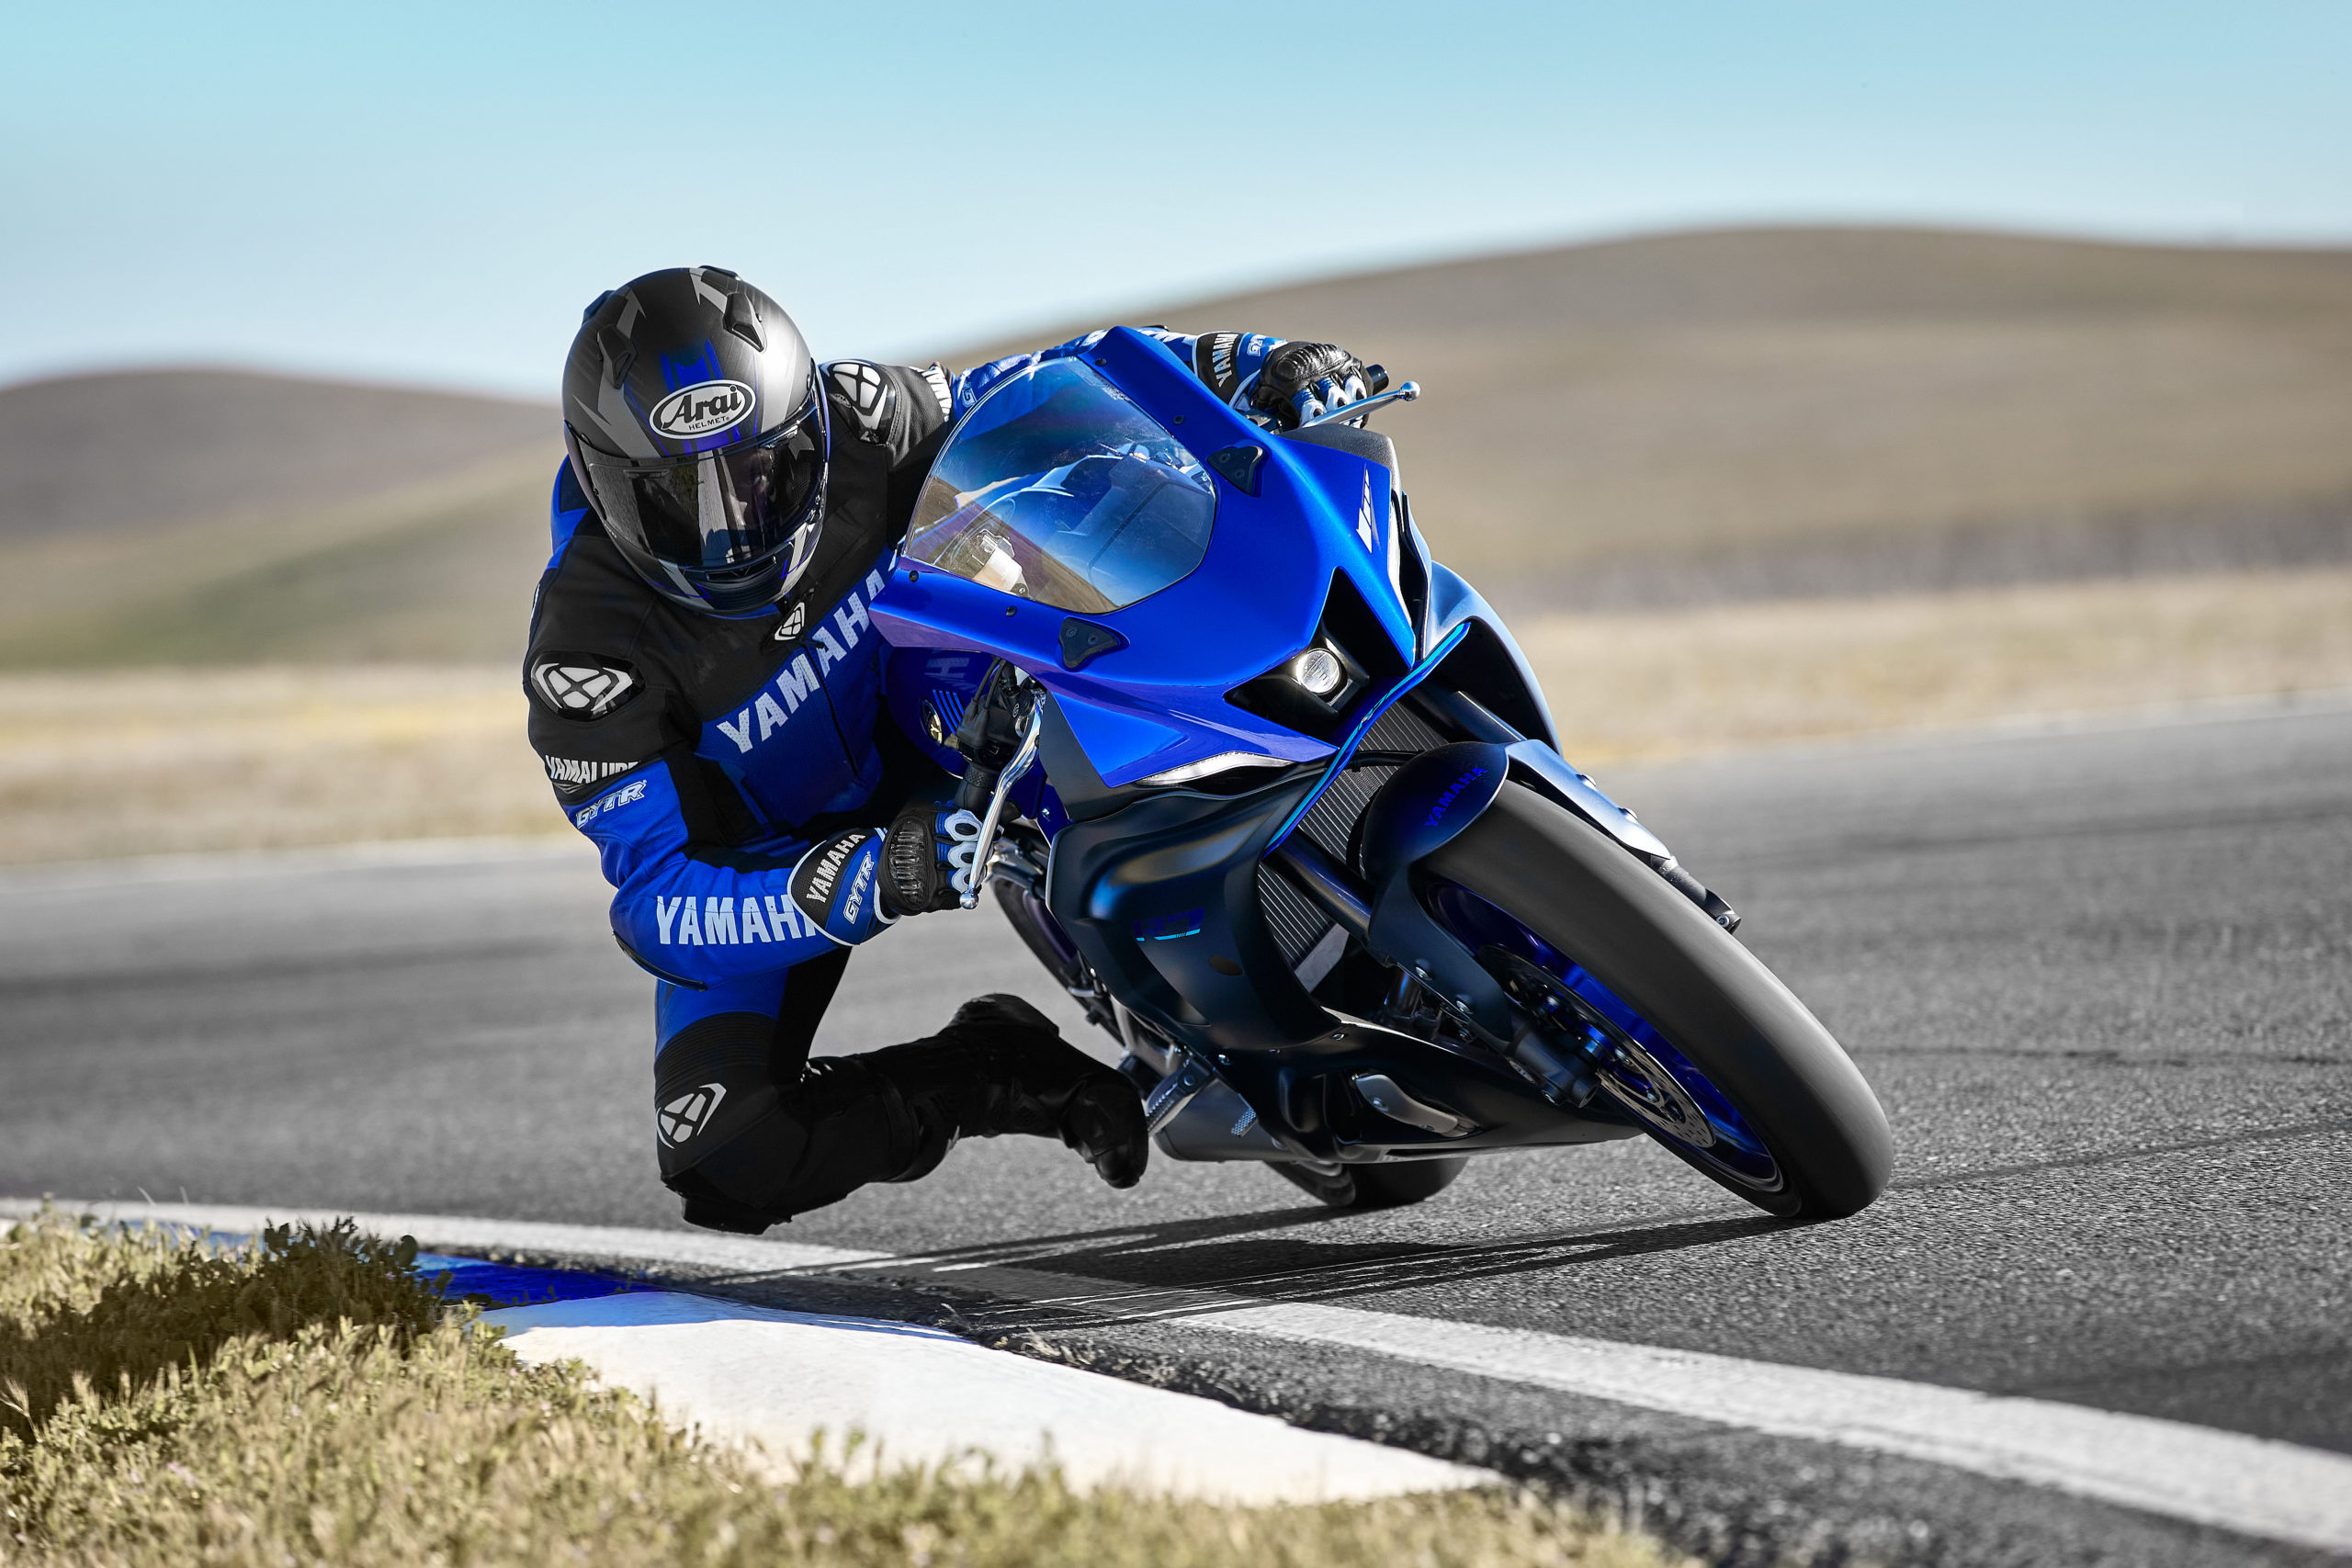 Yamaha YZF-R7 Wallpapers (29+ images inside)